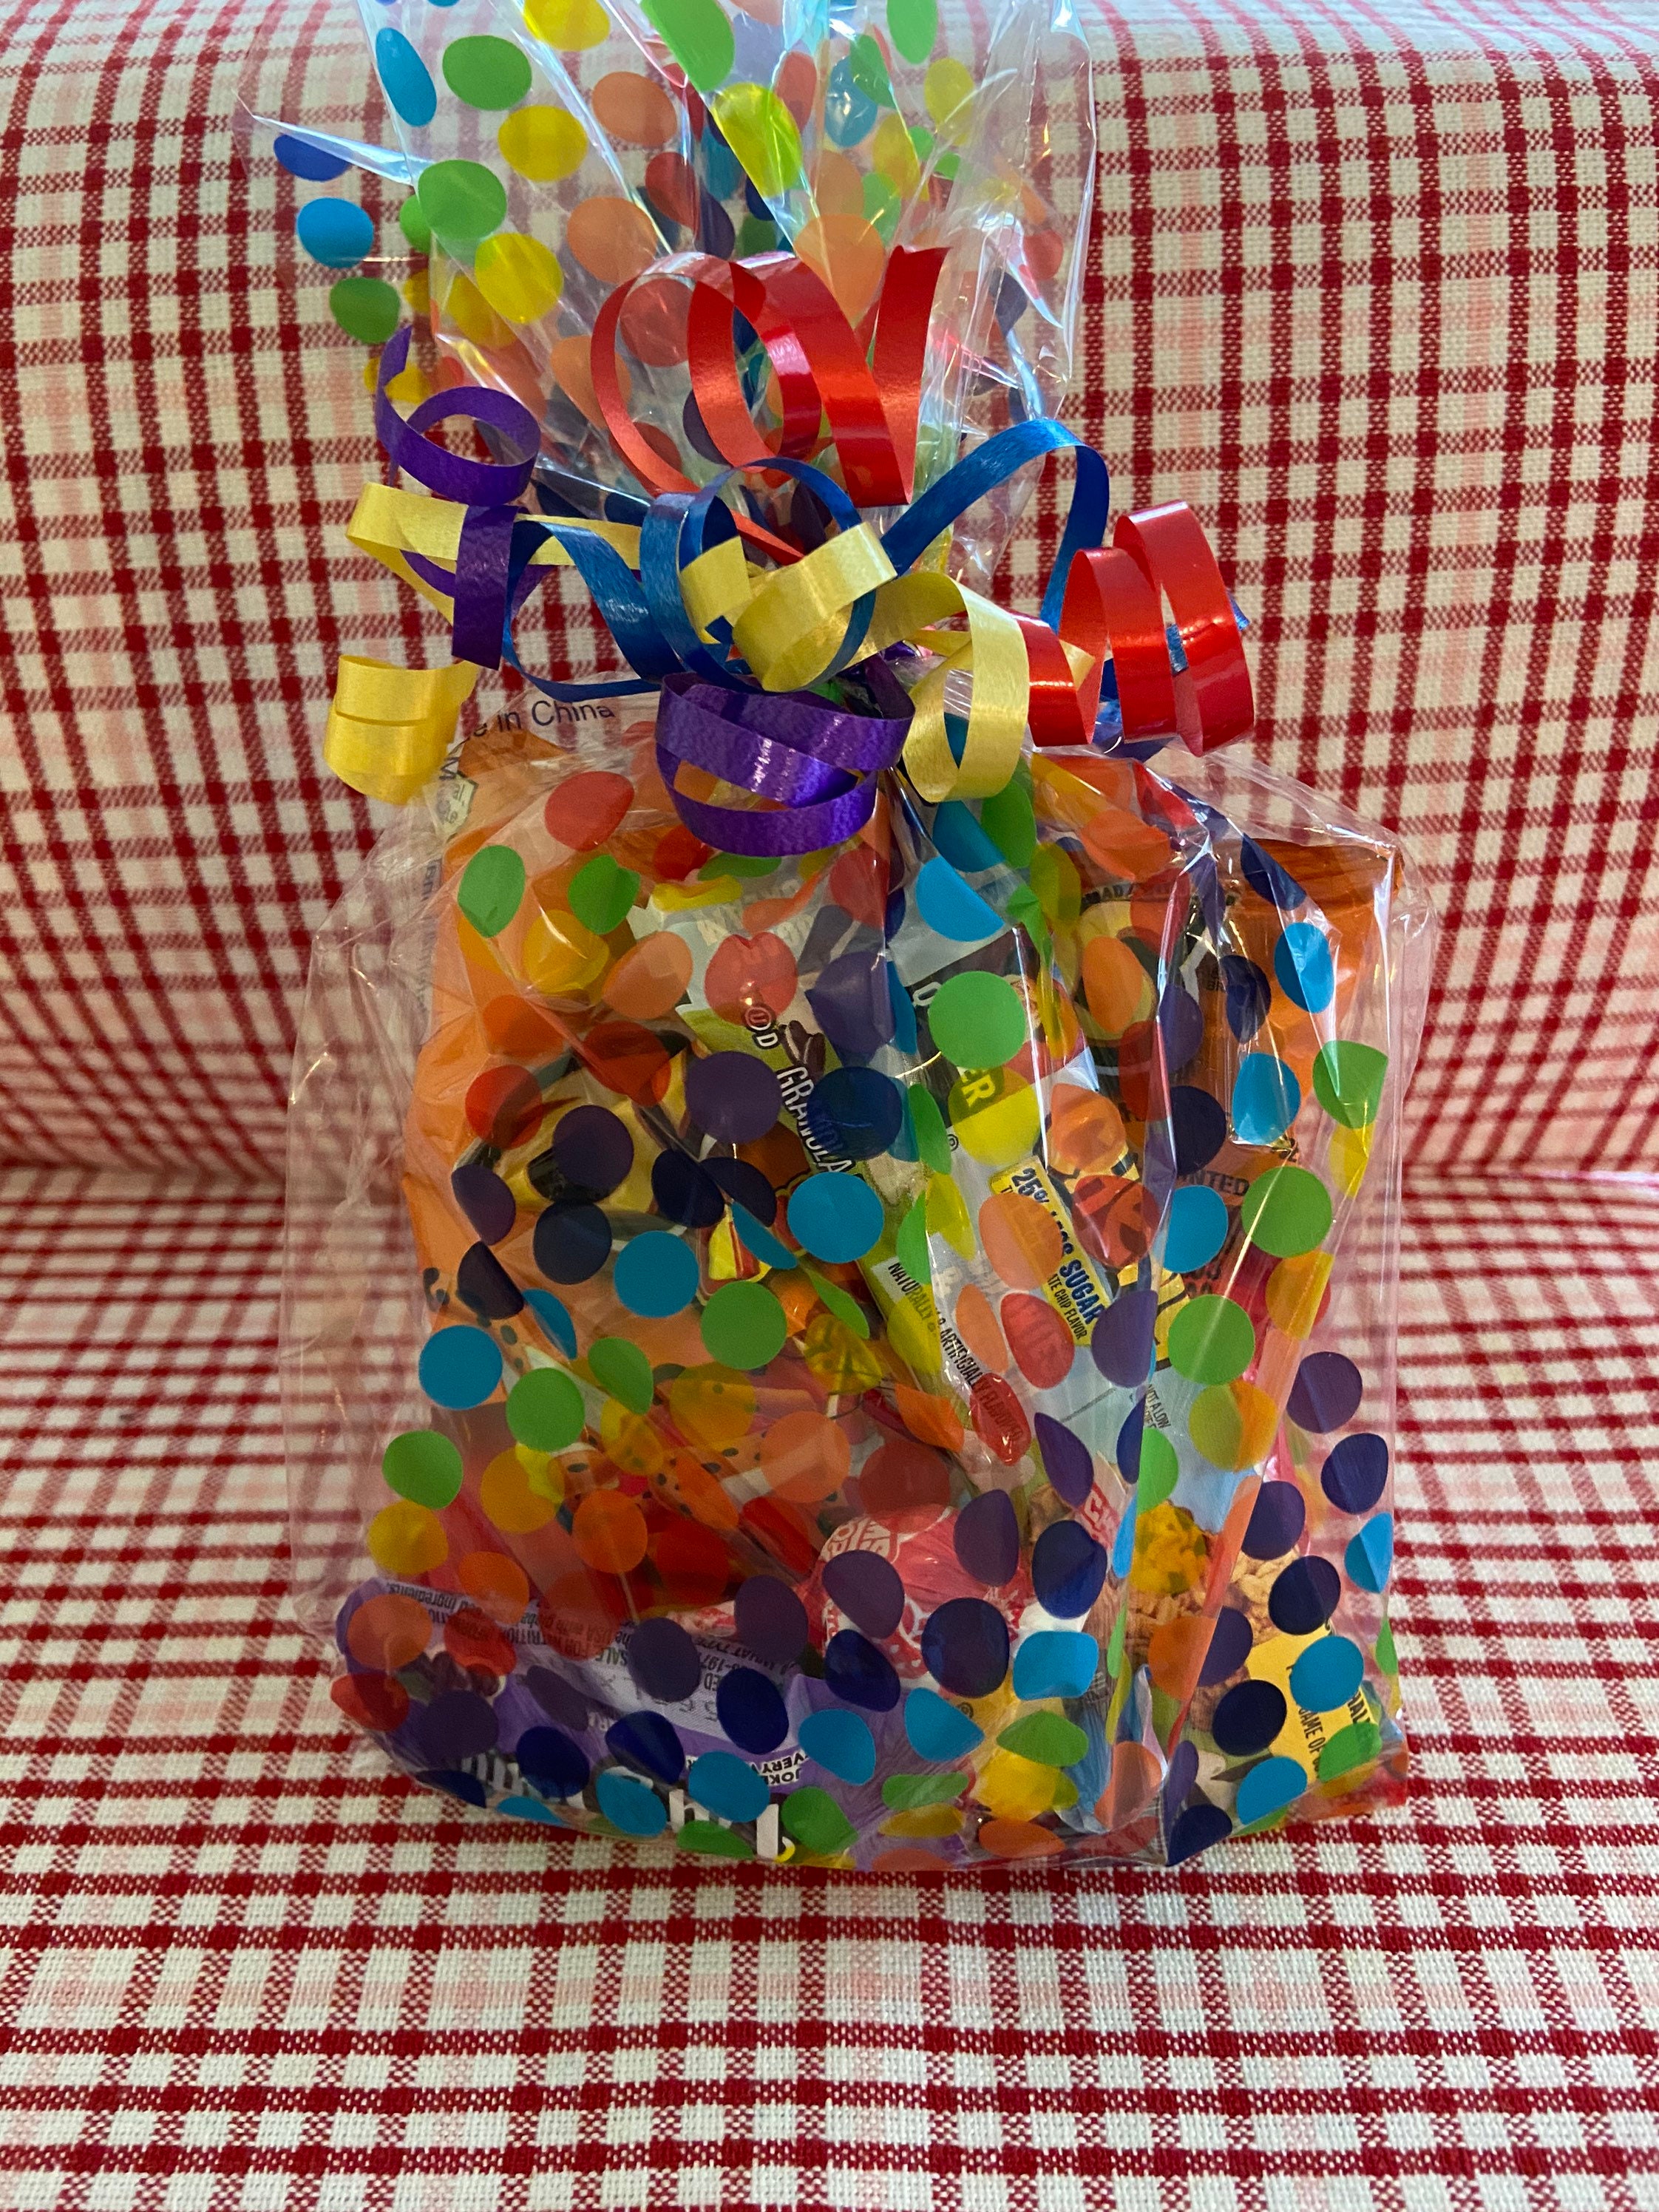 Birthday Party Favor Pre Filled Party Favors Goody Bags 